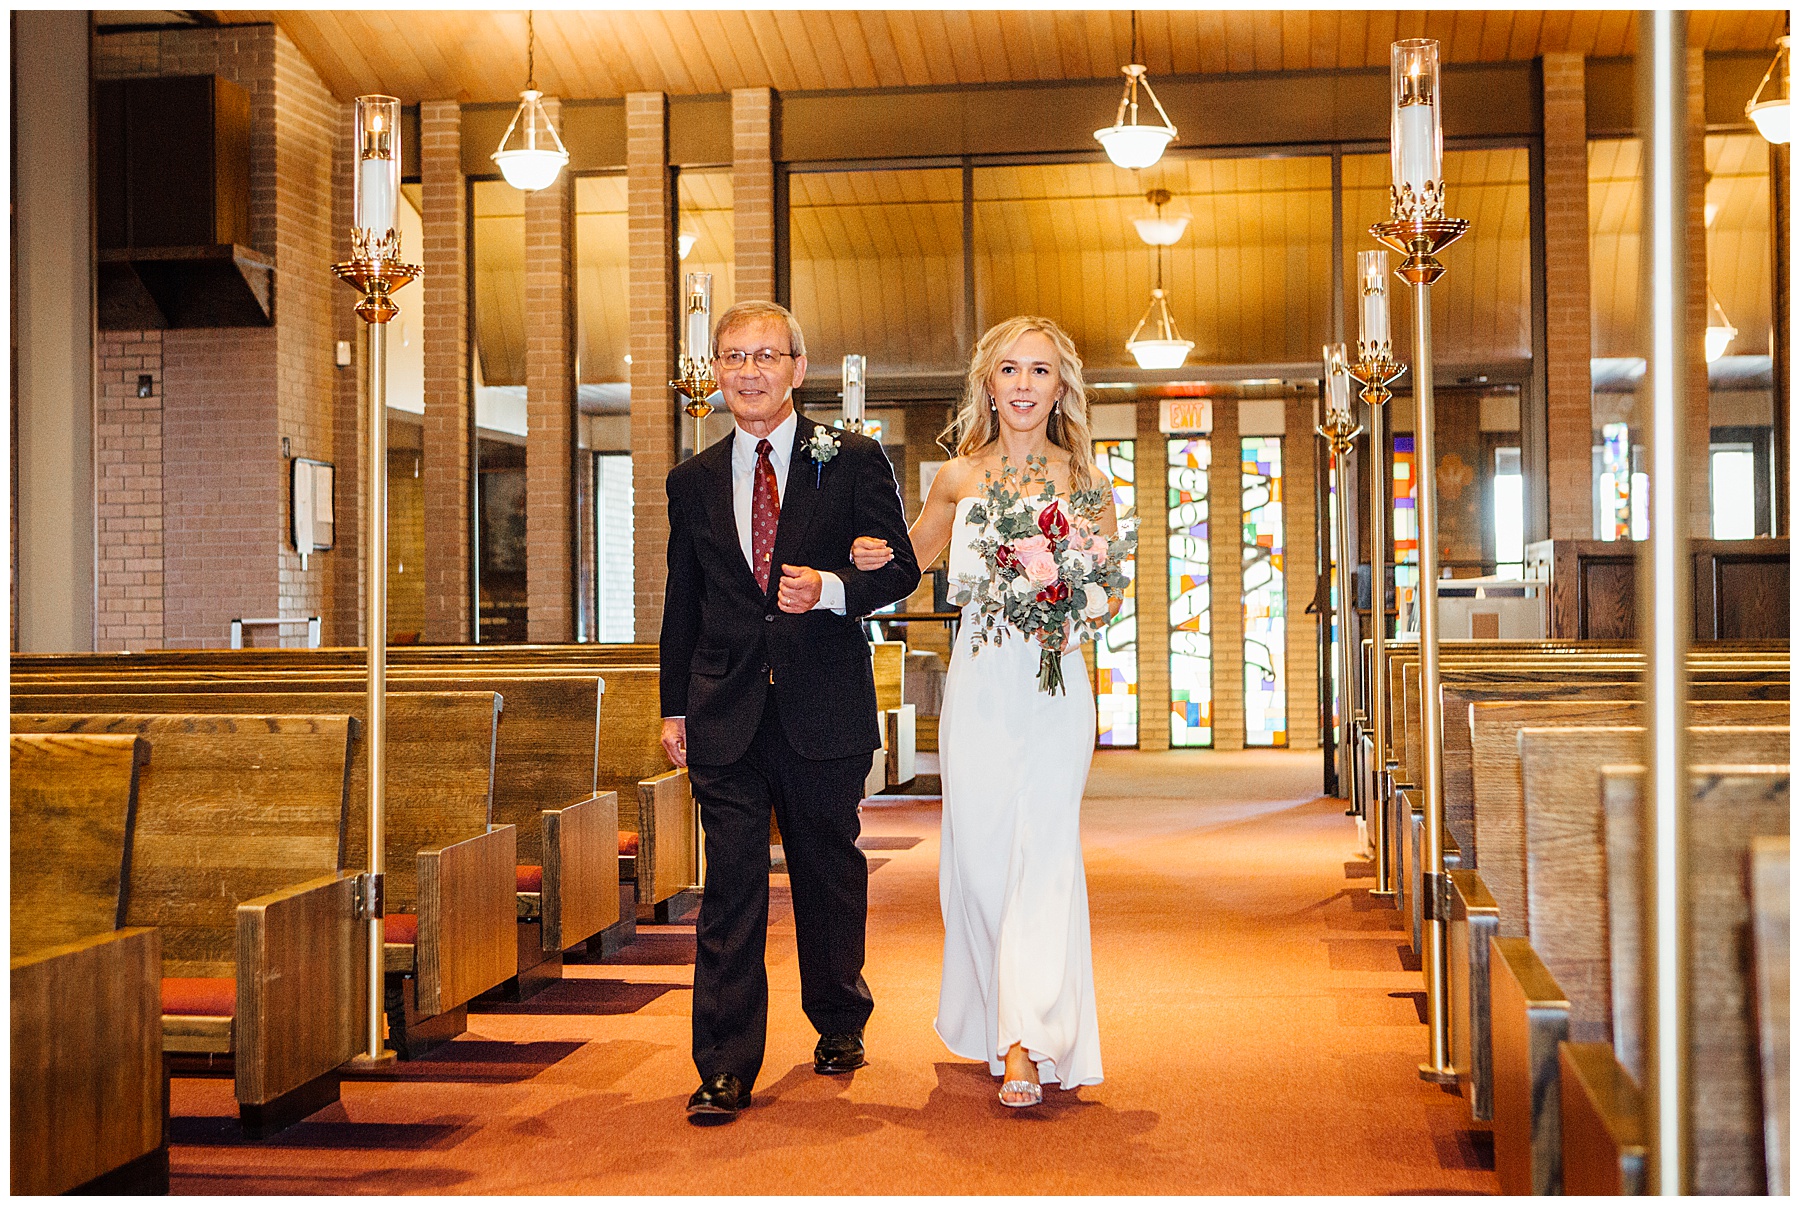 Bride and Father walking down aisle at Lutheran Church of the Master Wedding